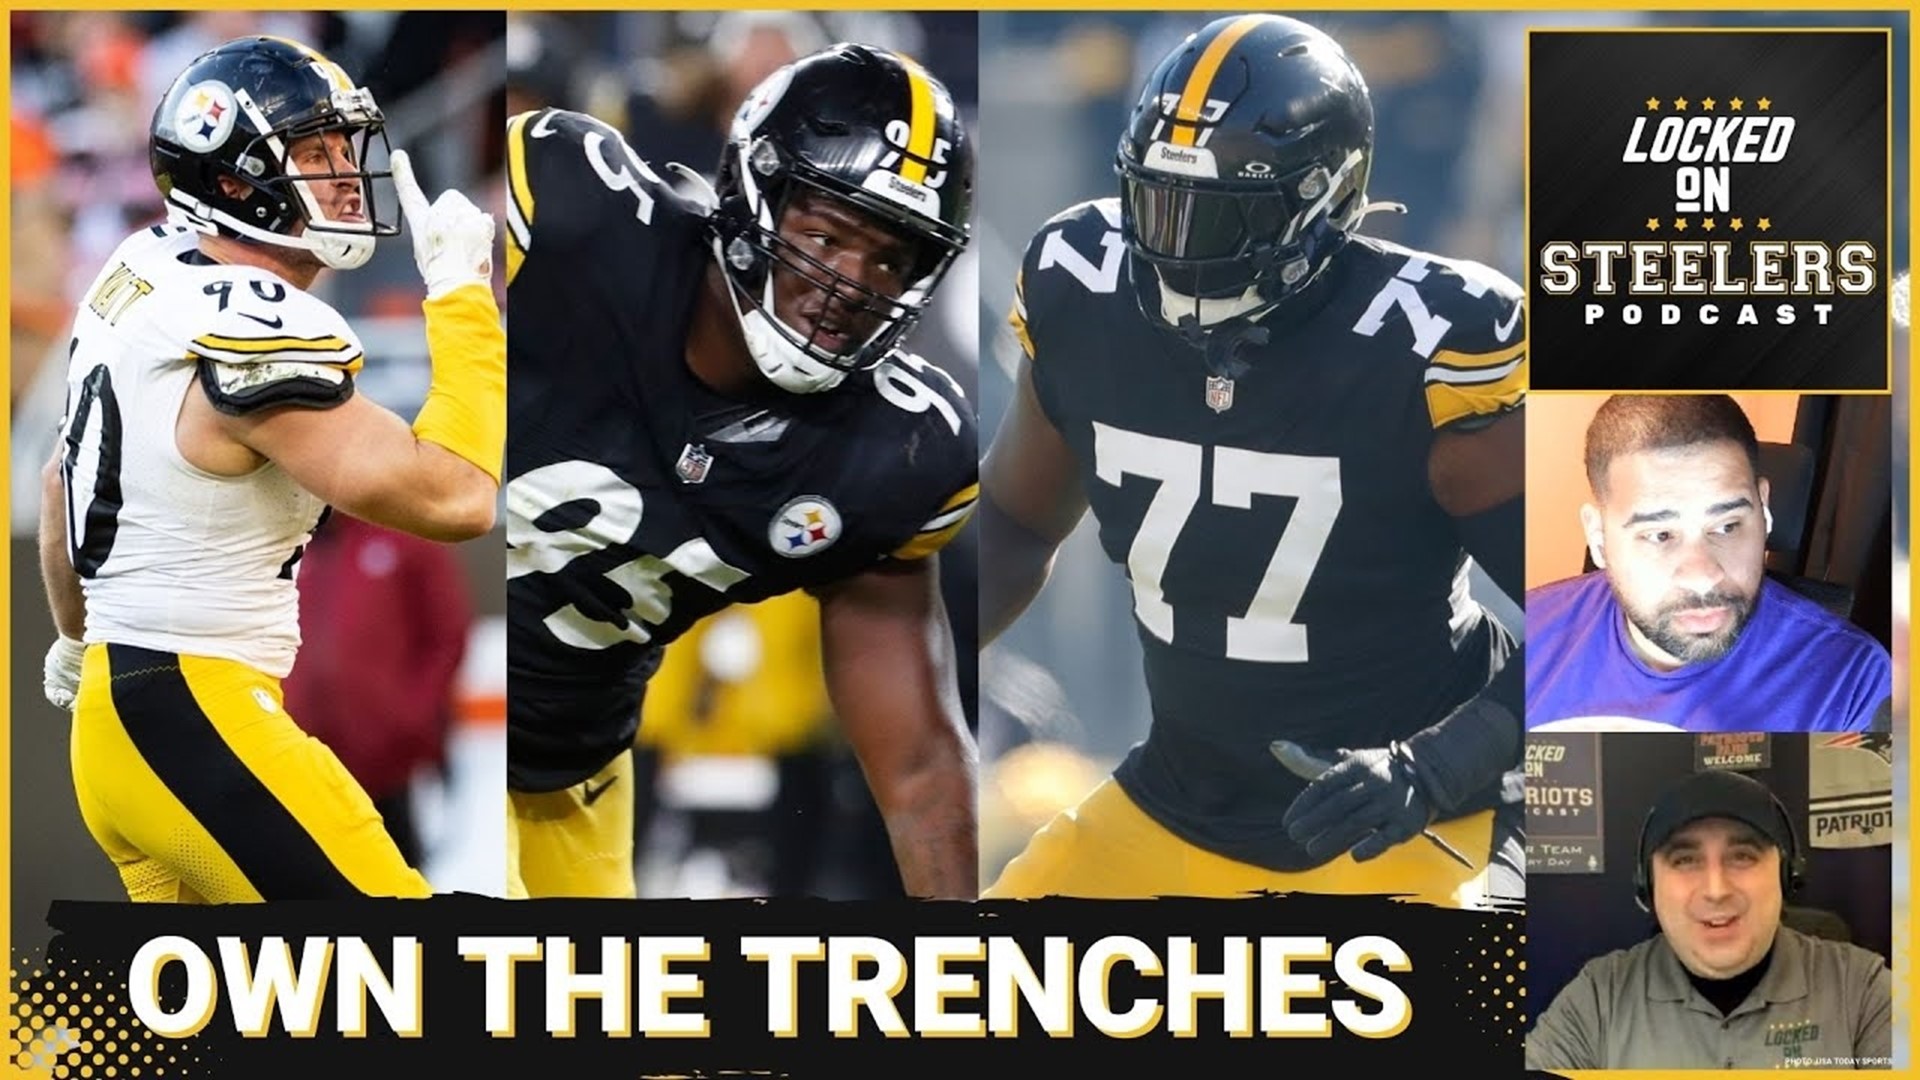 The Pittsburgh Steelers face another bad team at home in the New England Patriots Thursday night. To avoid another bad loss, they'll have to dominate the trenches.